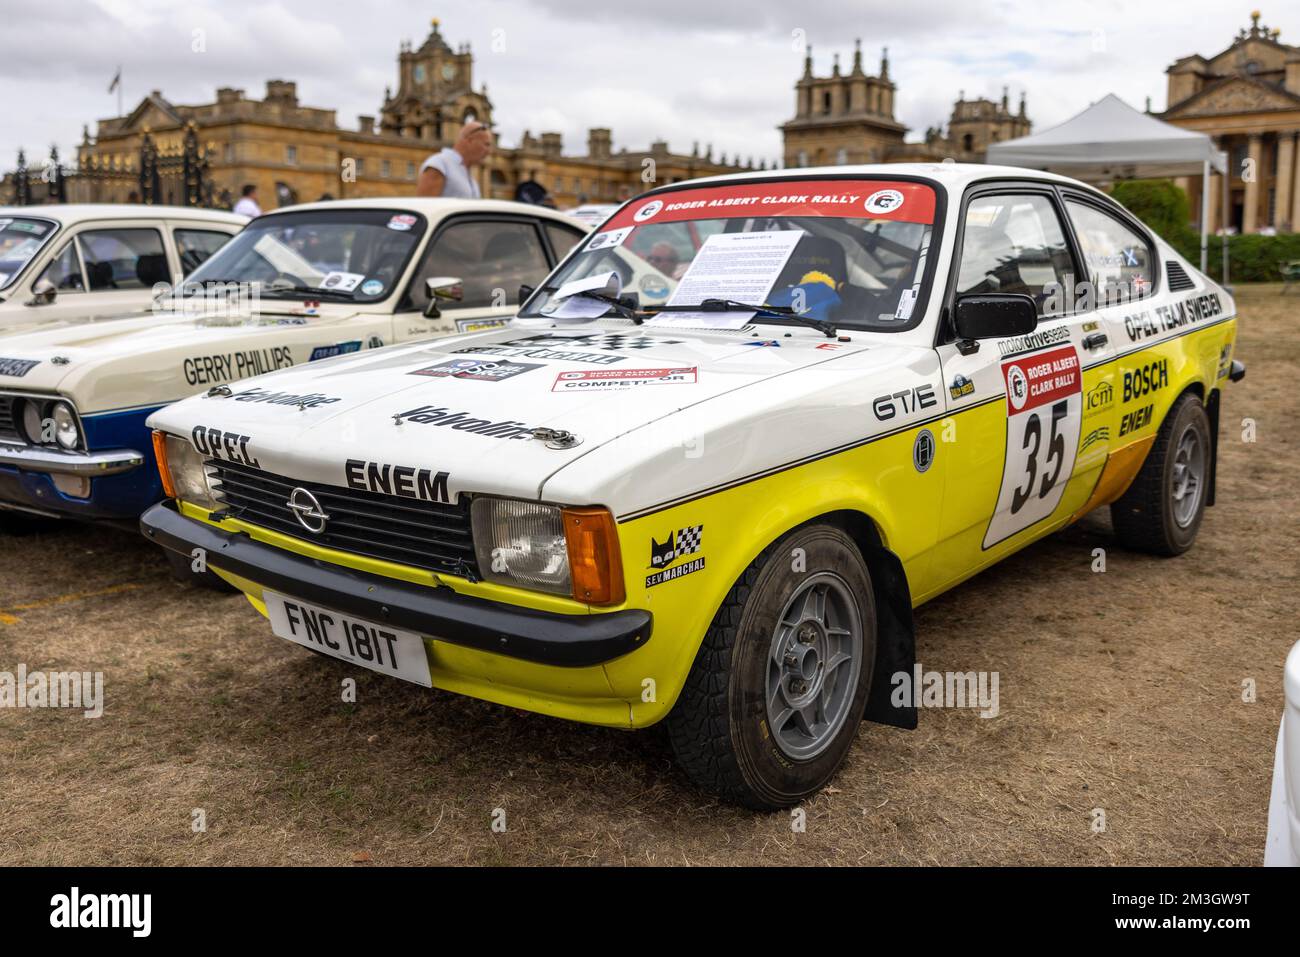 1979 Opel Kadett GT/E ‘FNC 181T’ on display at the Concours d’Elégance Supercar motor show held at Blenheim Palace on the 4th September 2022. Stock Photo